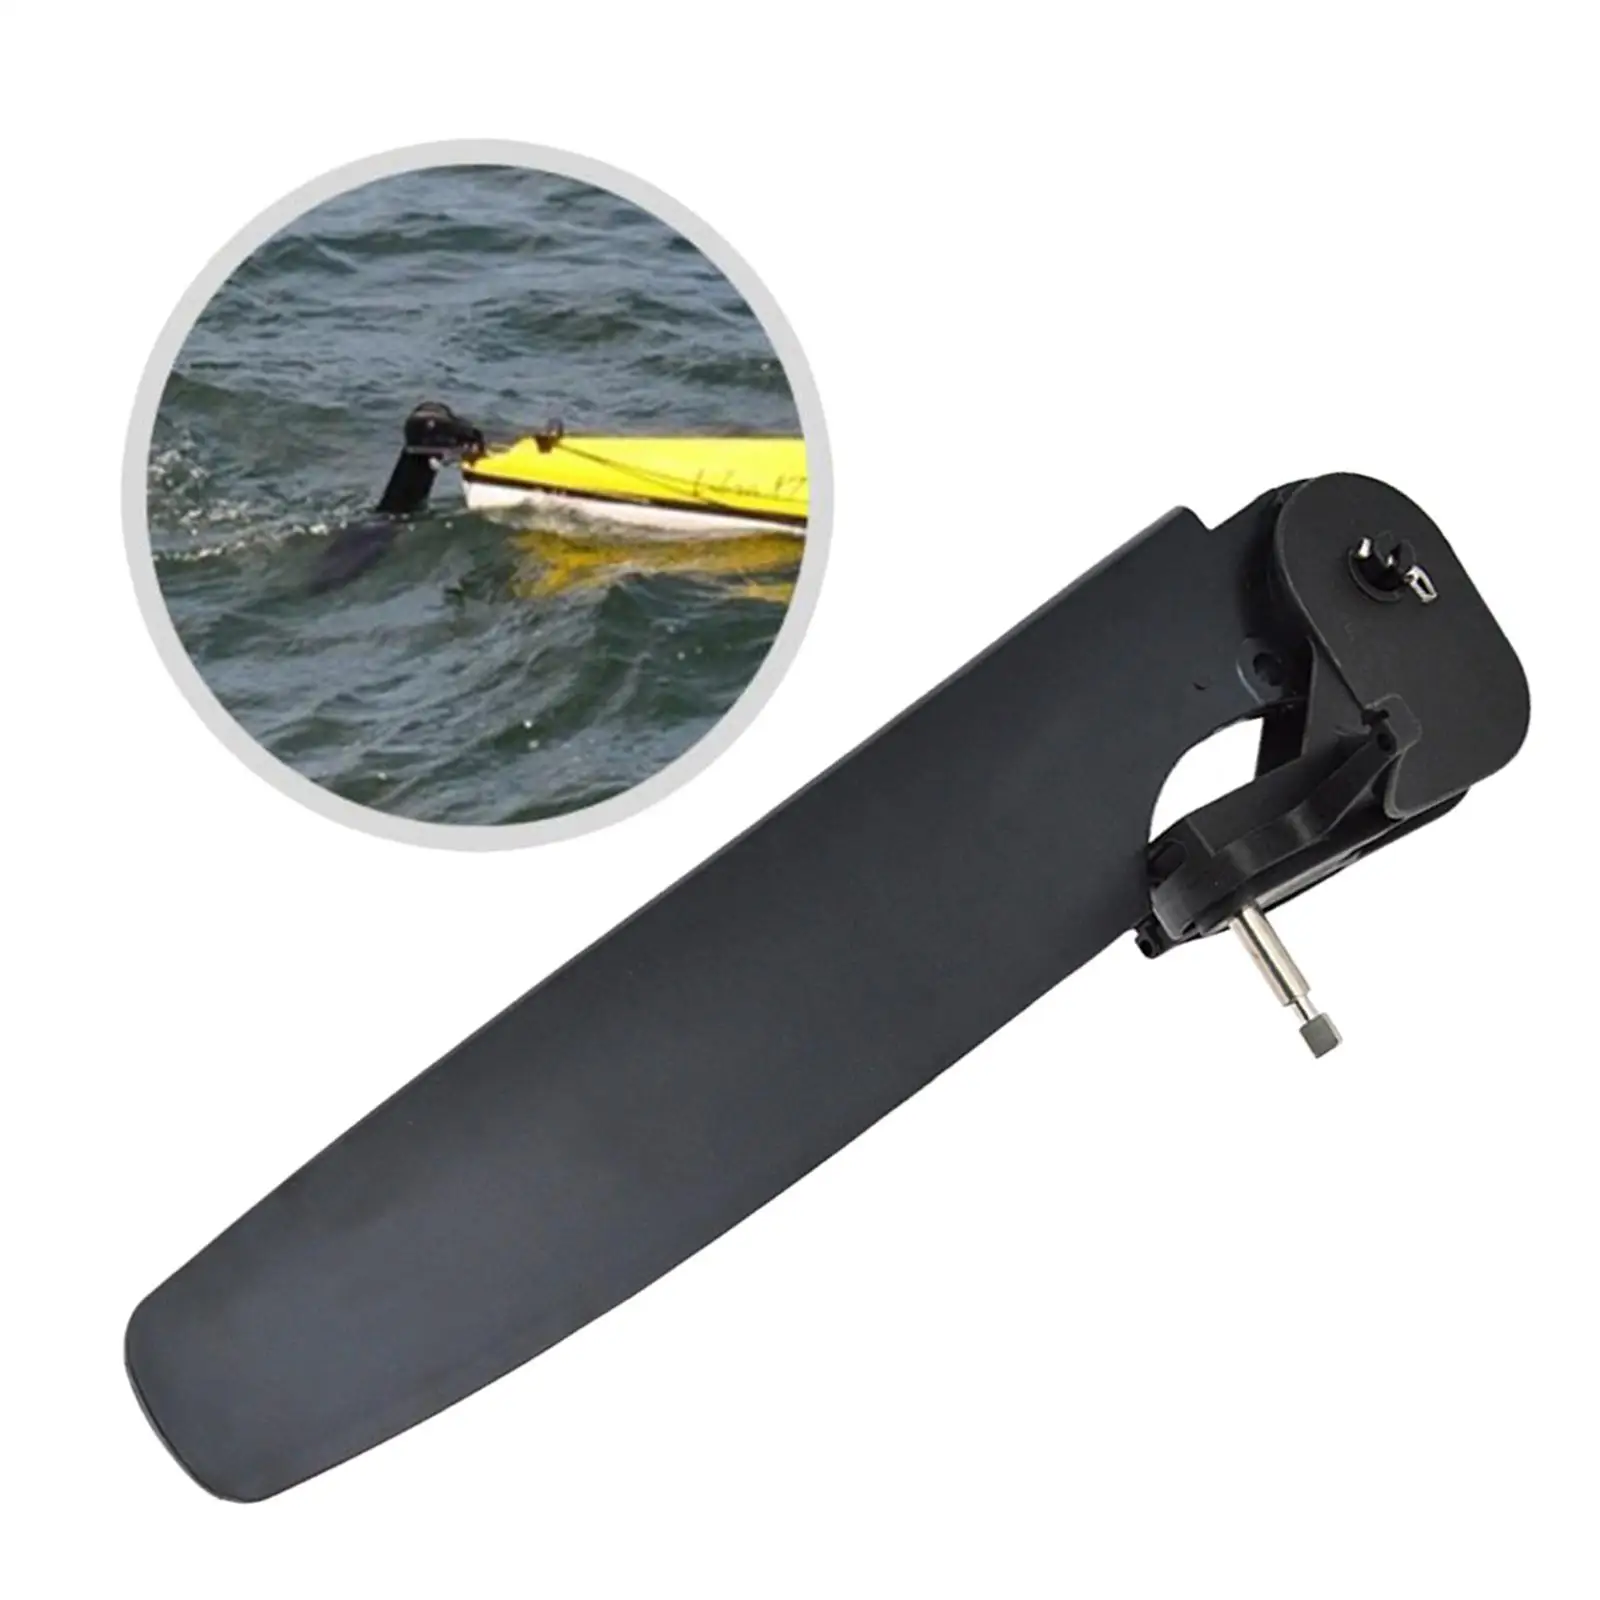 Adjustable Fixation Rear Tail Rudder Equipment for Kayak Canoe Control Direction 